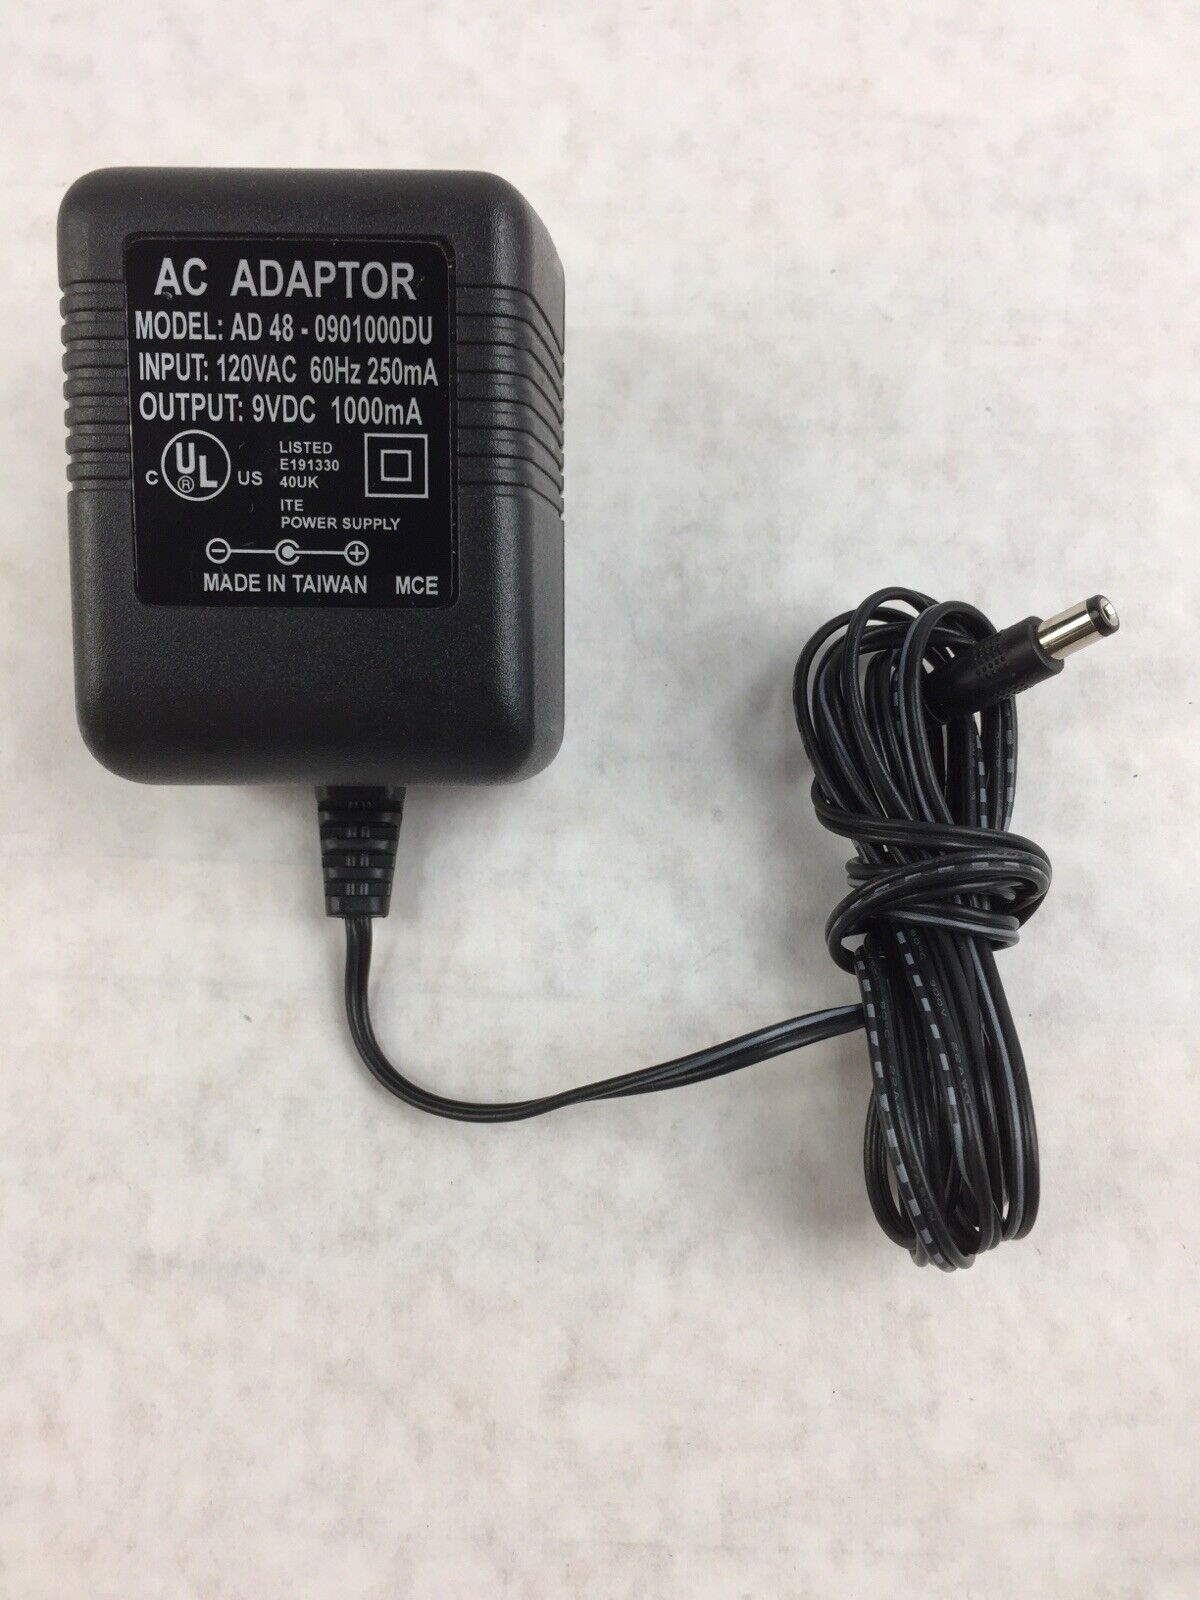 AC Adapter Model AD48-1351000 DU Output 13.5 VDC 1A ITE